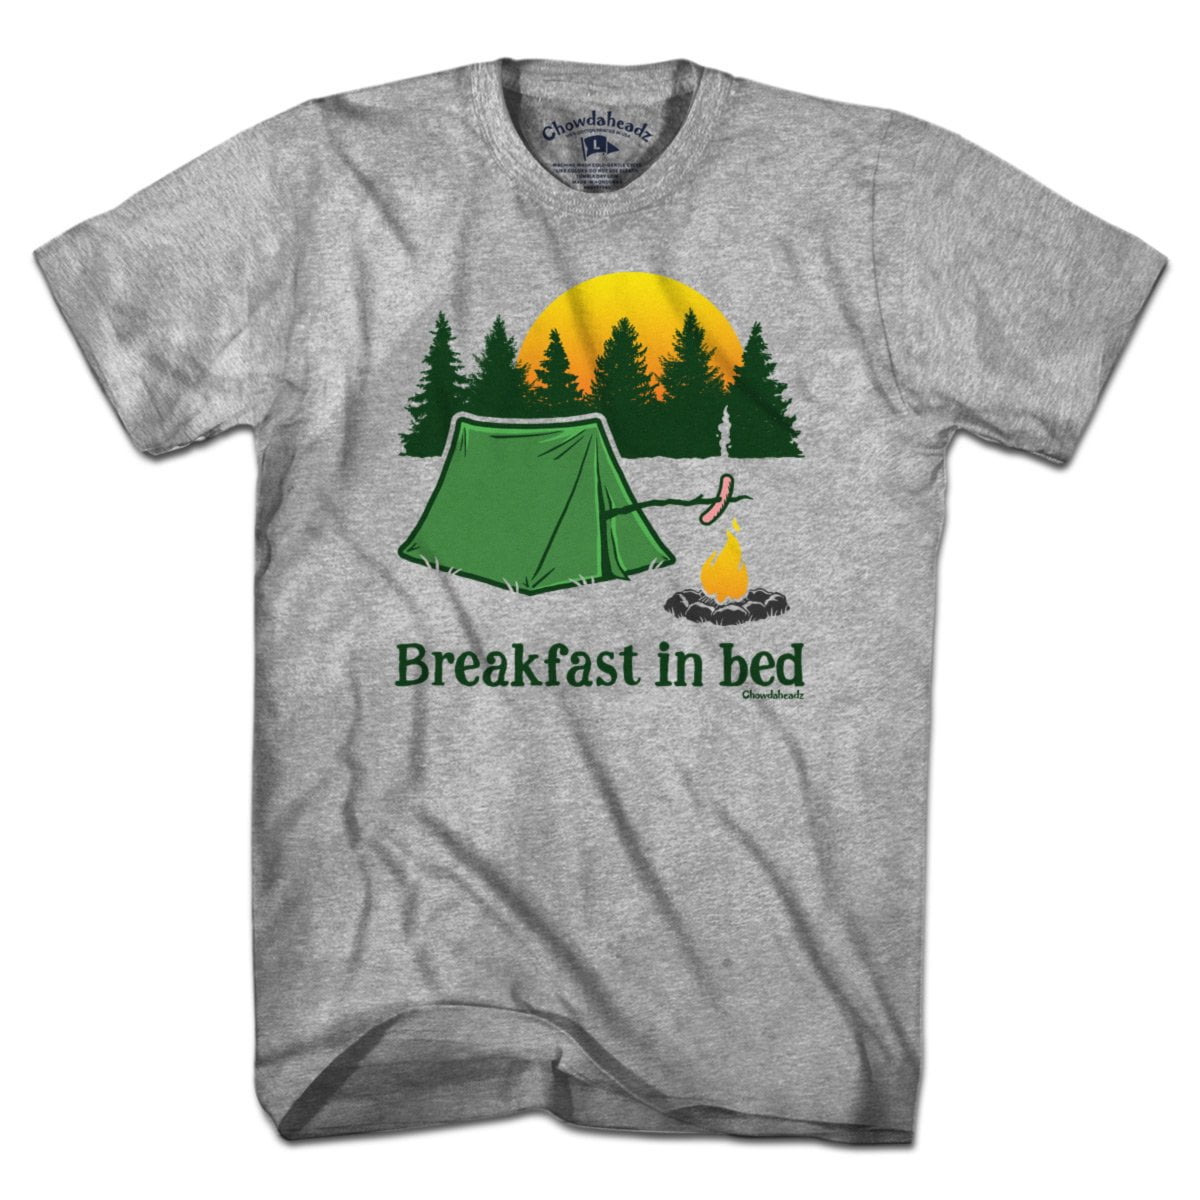 Breakfast in Bed Camping T-Shirt - Chowdaheadz